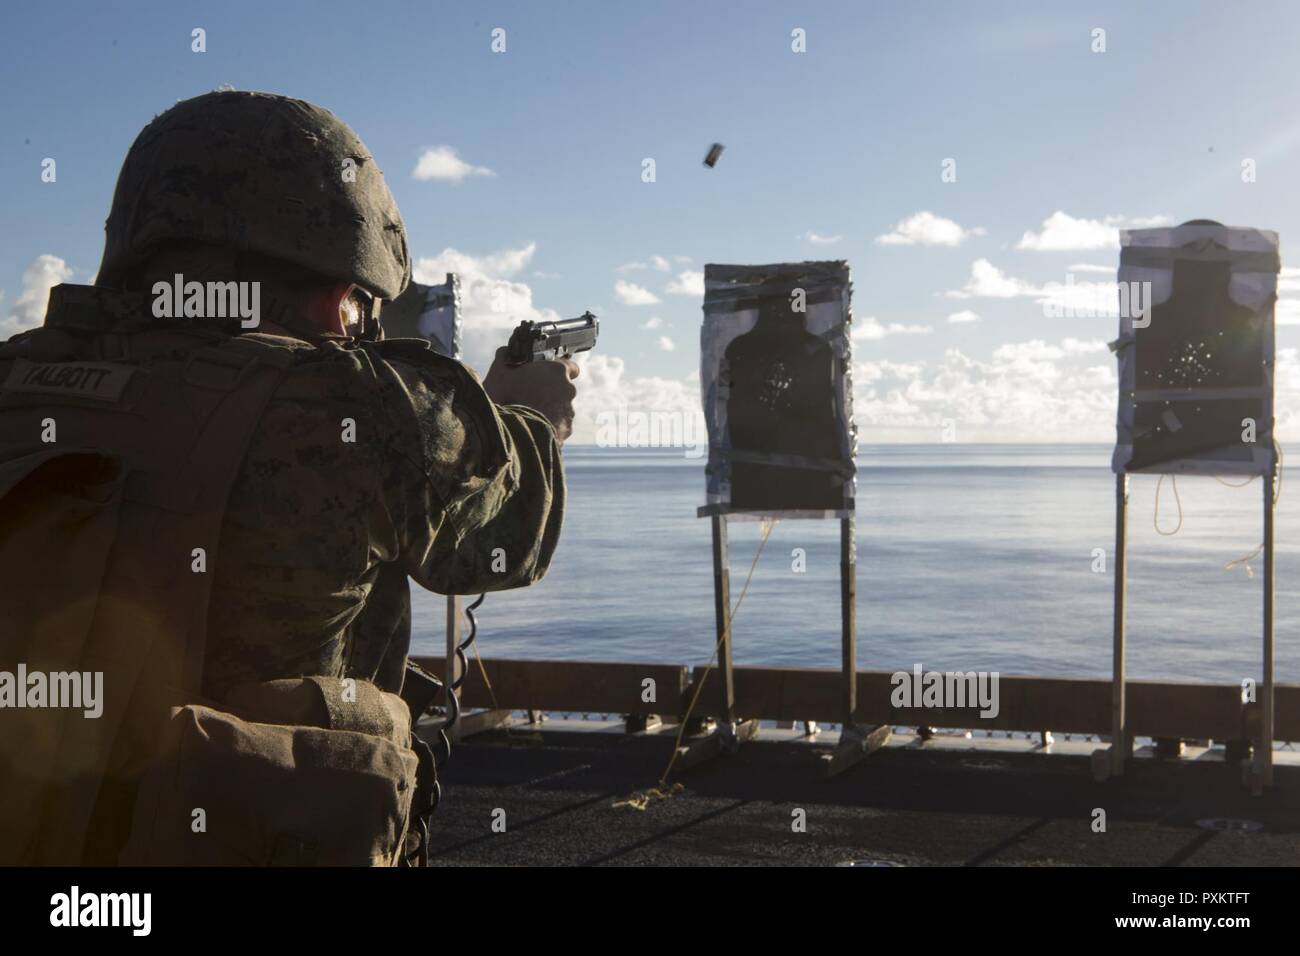 Lance Cpl. Evan Talbott, a military policeman with Combat Logistics Battalion 31, fires an M9A1 9mm service pistol during marksmanship training aboard the USS Bonhomme Richard (LHD 6), June 15, 2017. CLB-31 is permanently assigned to the 31st MEU and provides support for all elements of the MEU. The 31st MEU partners with the Navy’s Amphibious Squadron 11 to form the amphibious component of the Bonhomme Richard Expeditionary Strike Group. The 31st MEU and PHIBRON 11 combine to provide a cohesive blue-green team capable of accomplishing a variety of missions across the Indo-Asia-Pacific region. Stock Photo